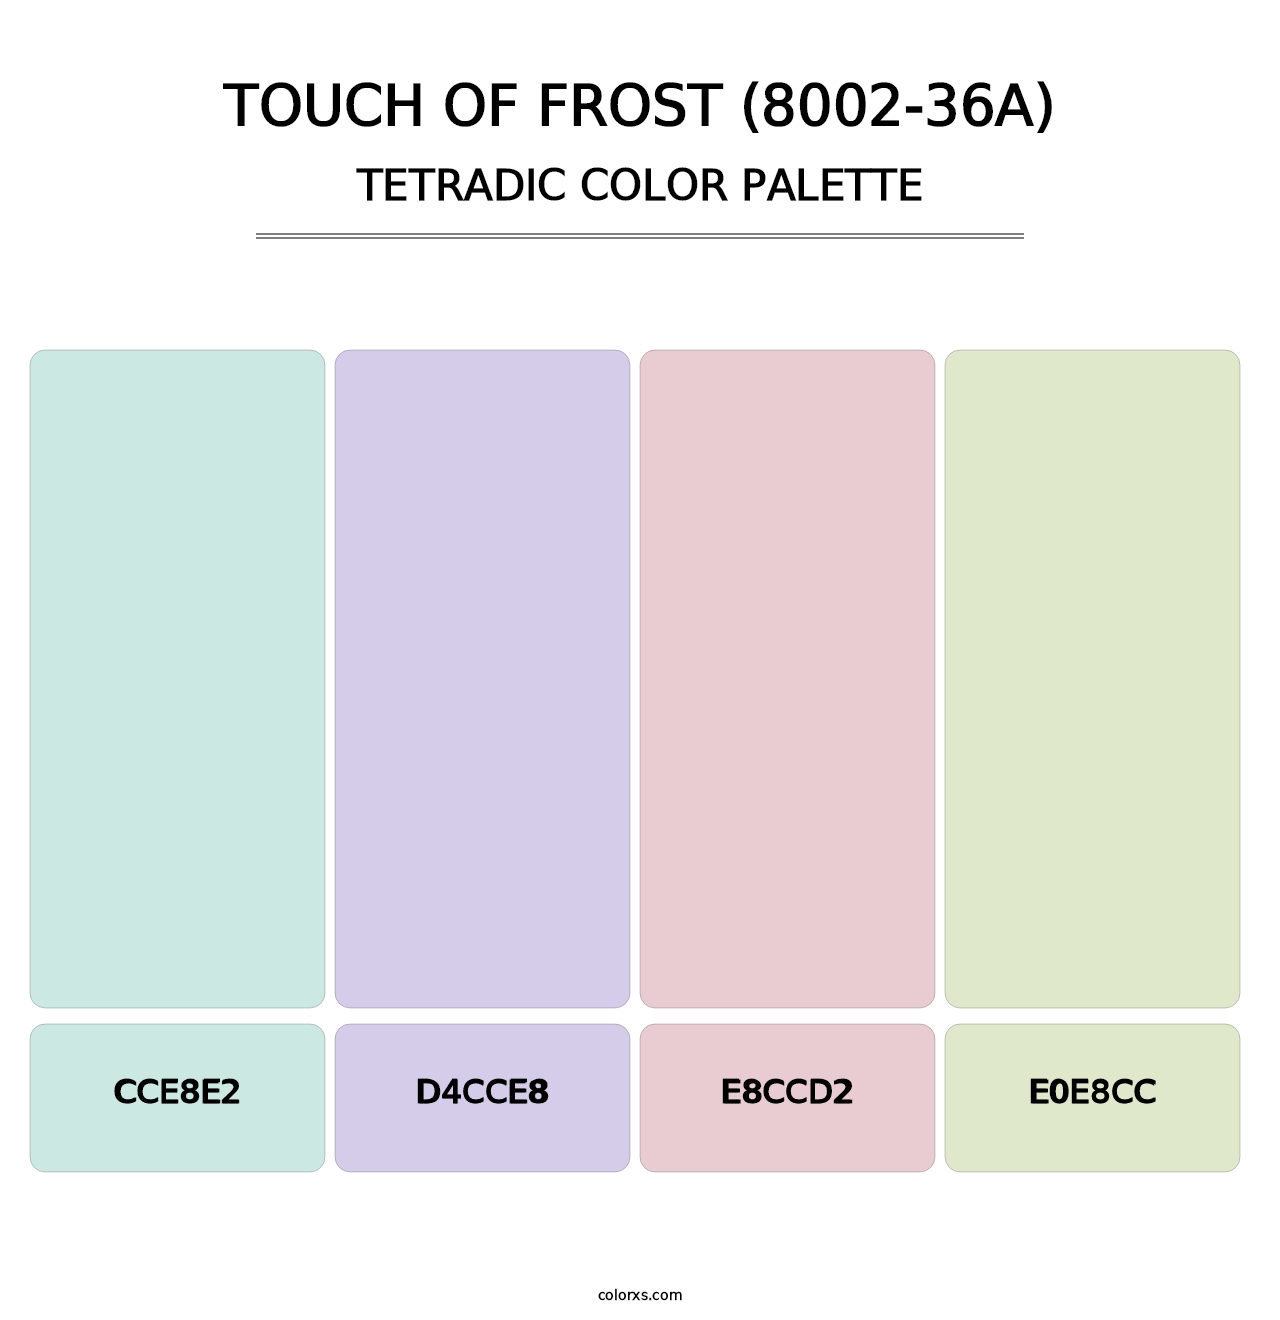 Touch of Frost (8002-36A) - Tetradic Color Palette